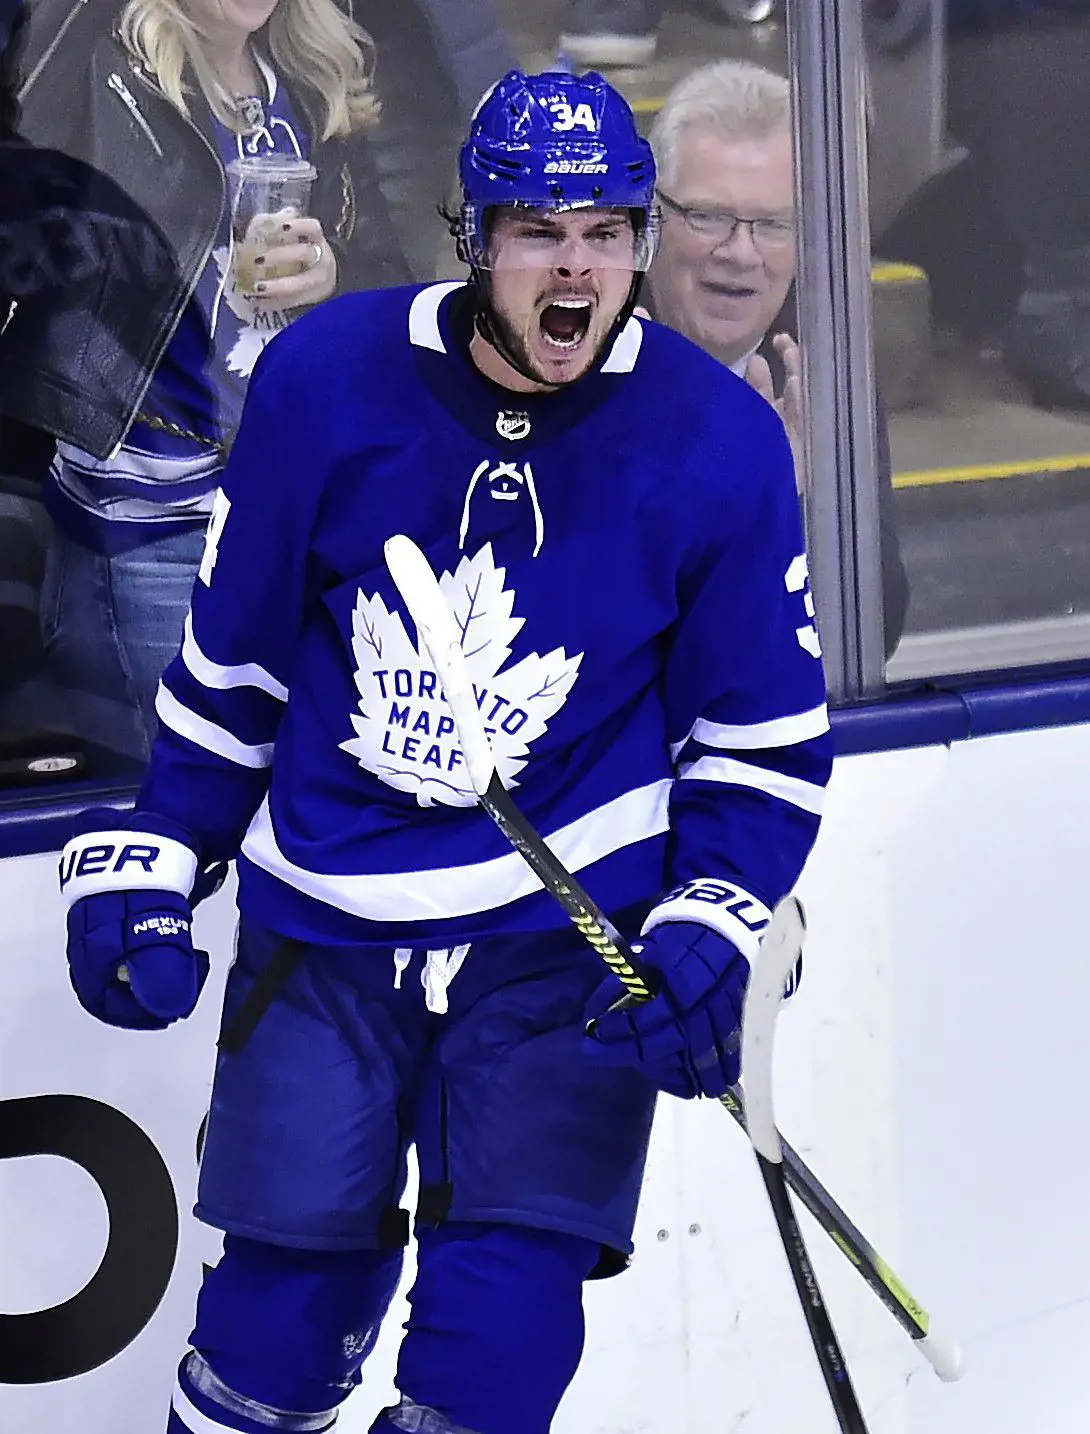 Matthew becomes the superstar center of the Maple Leafs who continues to appear in the nominations of the Hart Trophy and achieves it in the 2021-22 season.